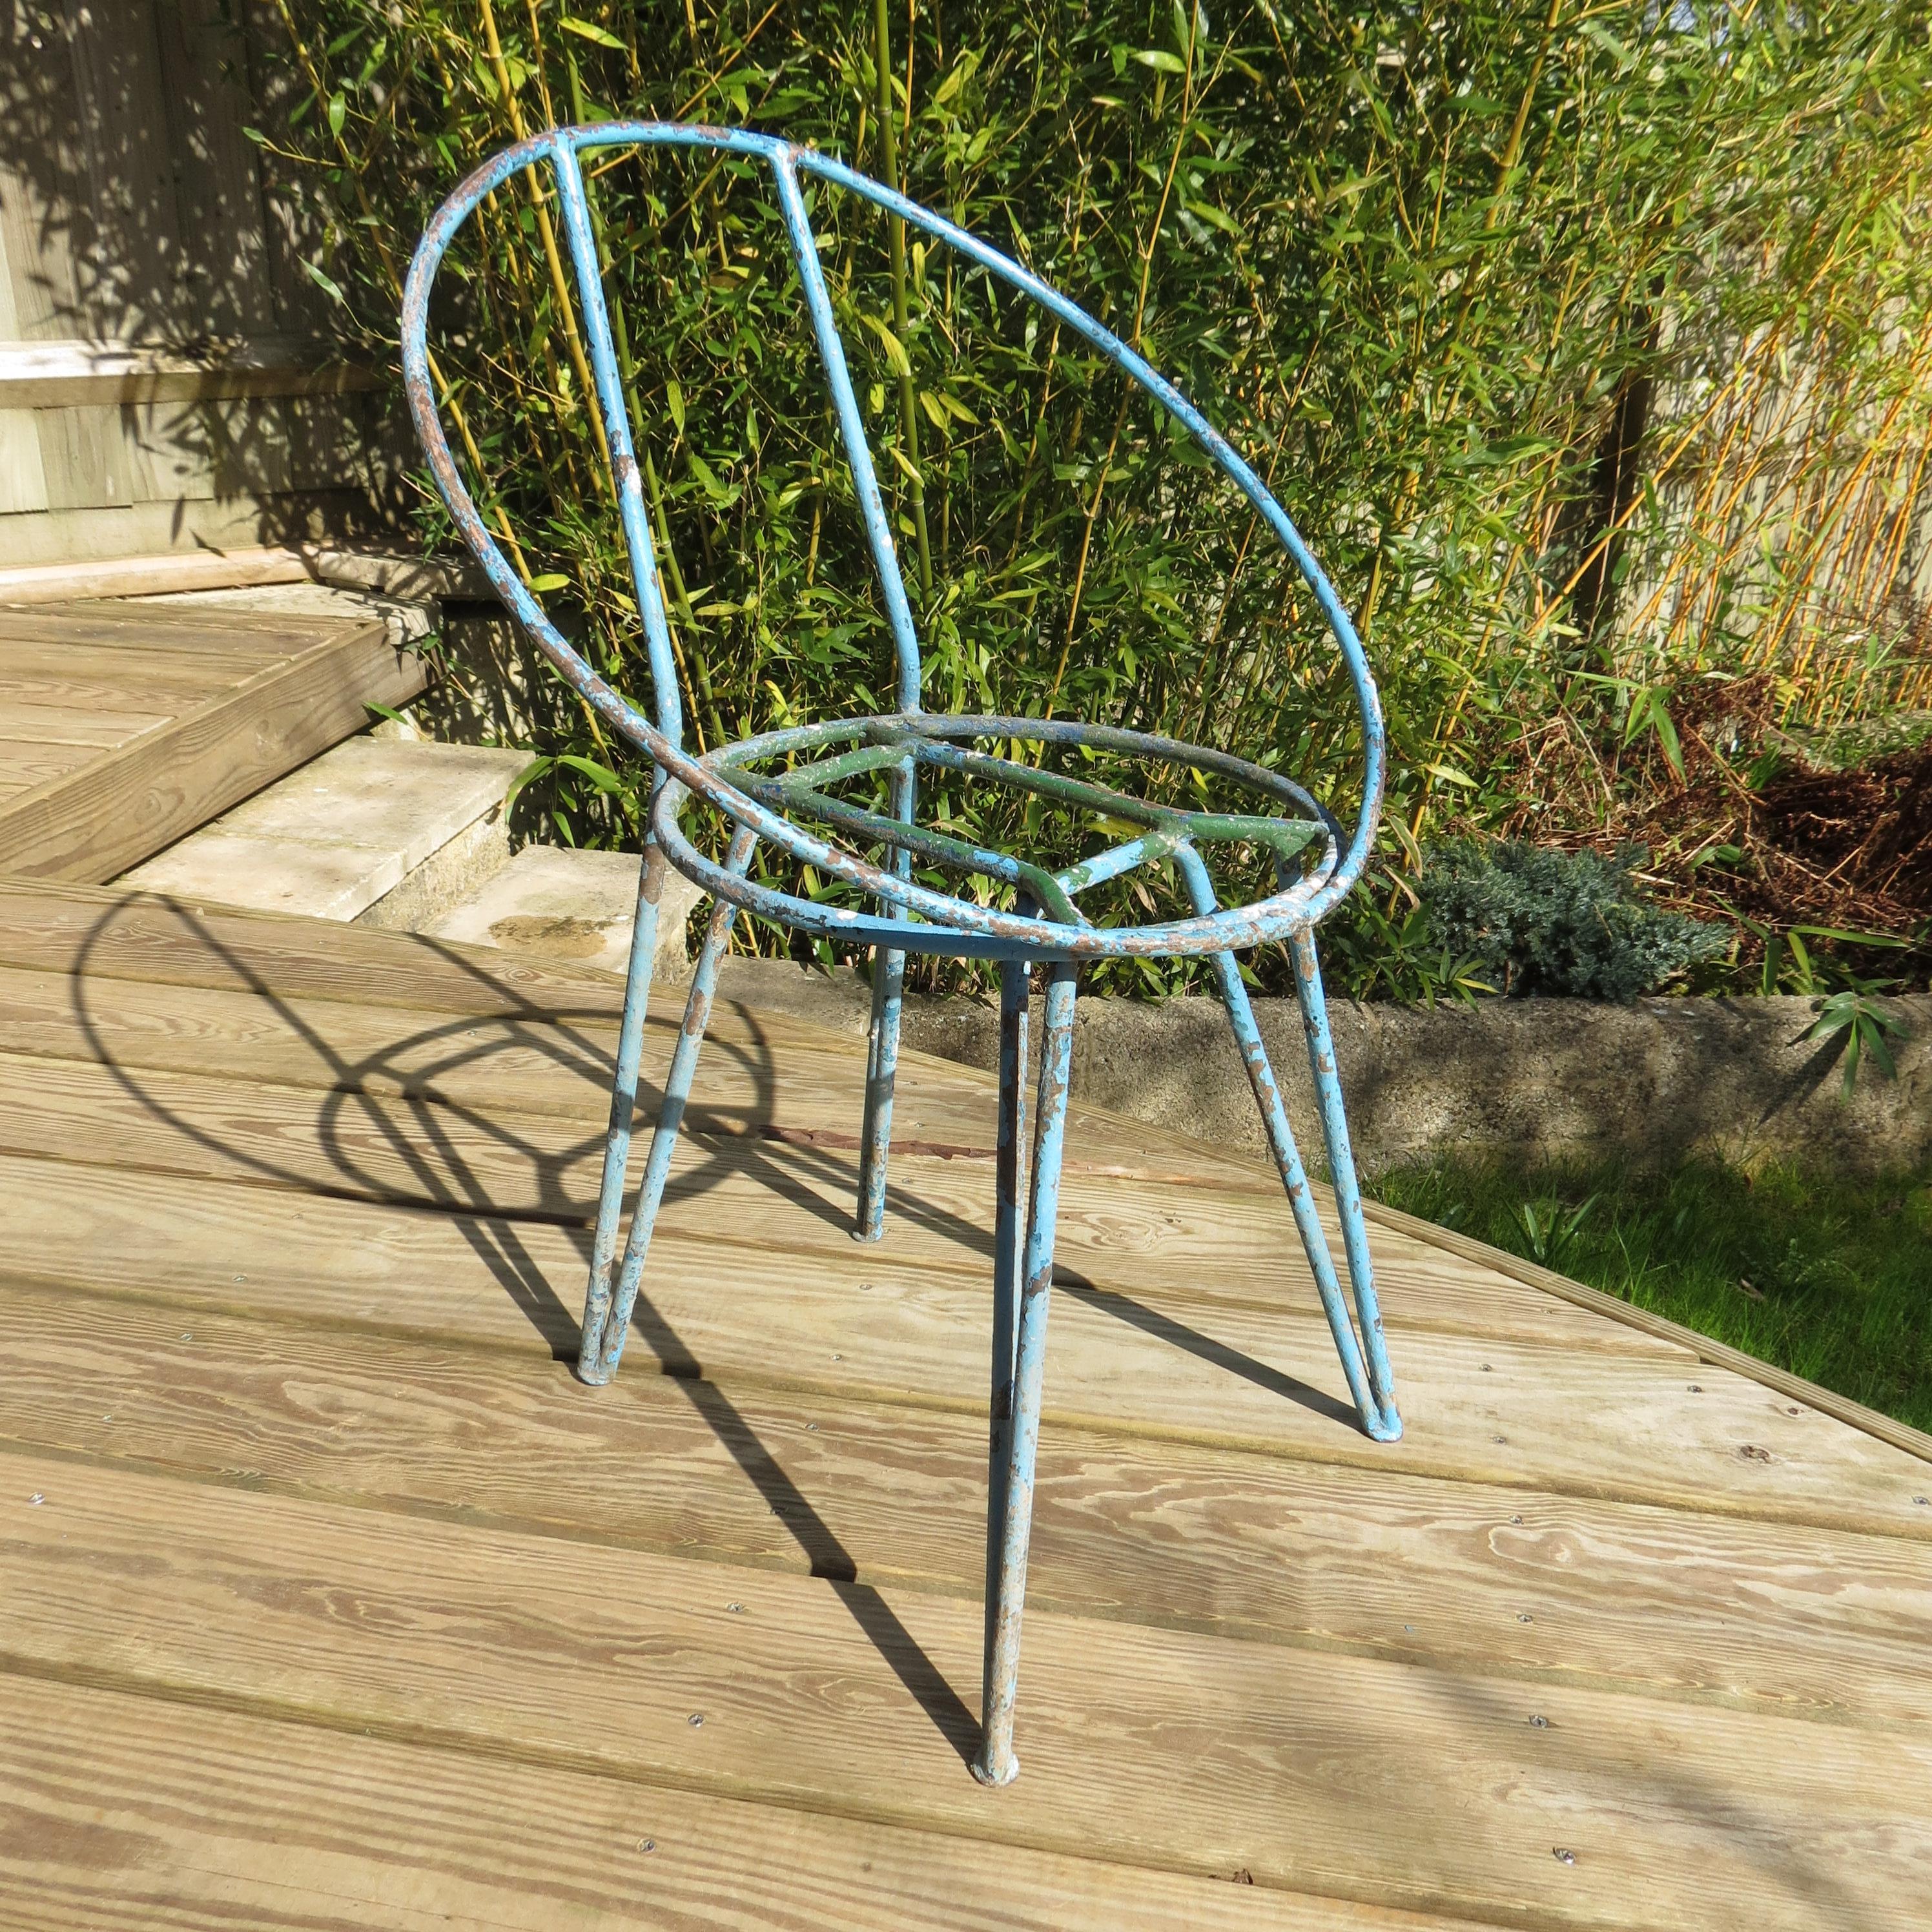 Mid-Century Modern Set of 4 Metal Garden Chairs from the 1950s